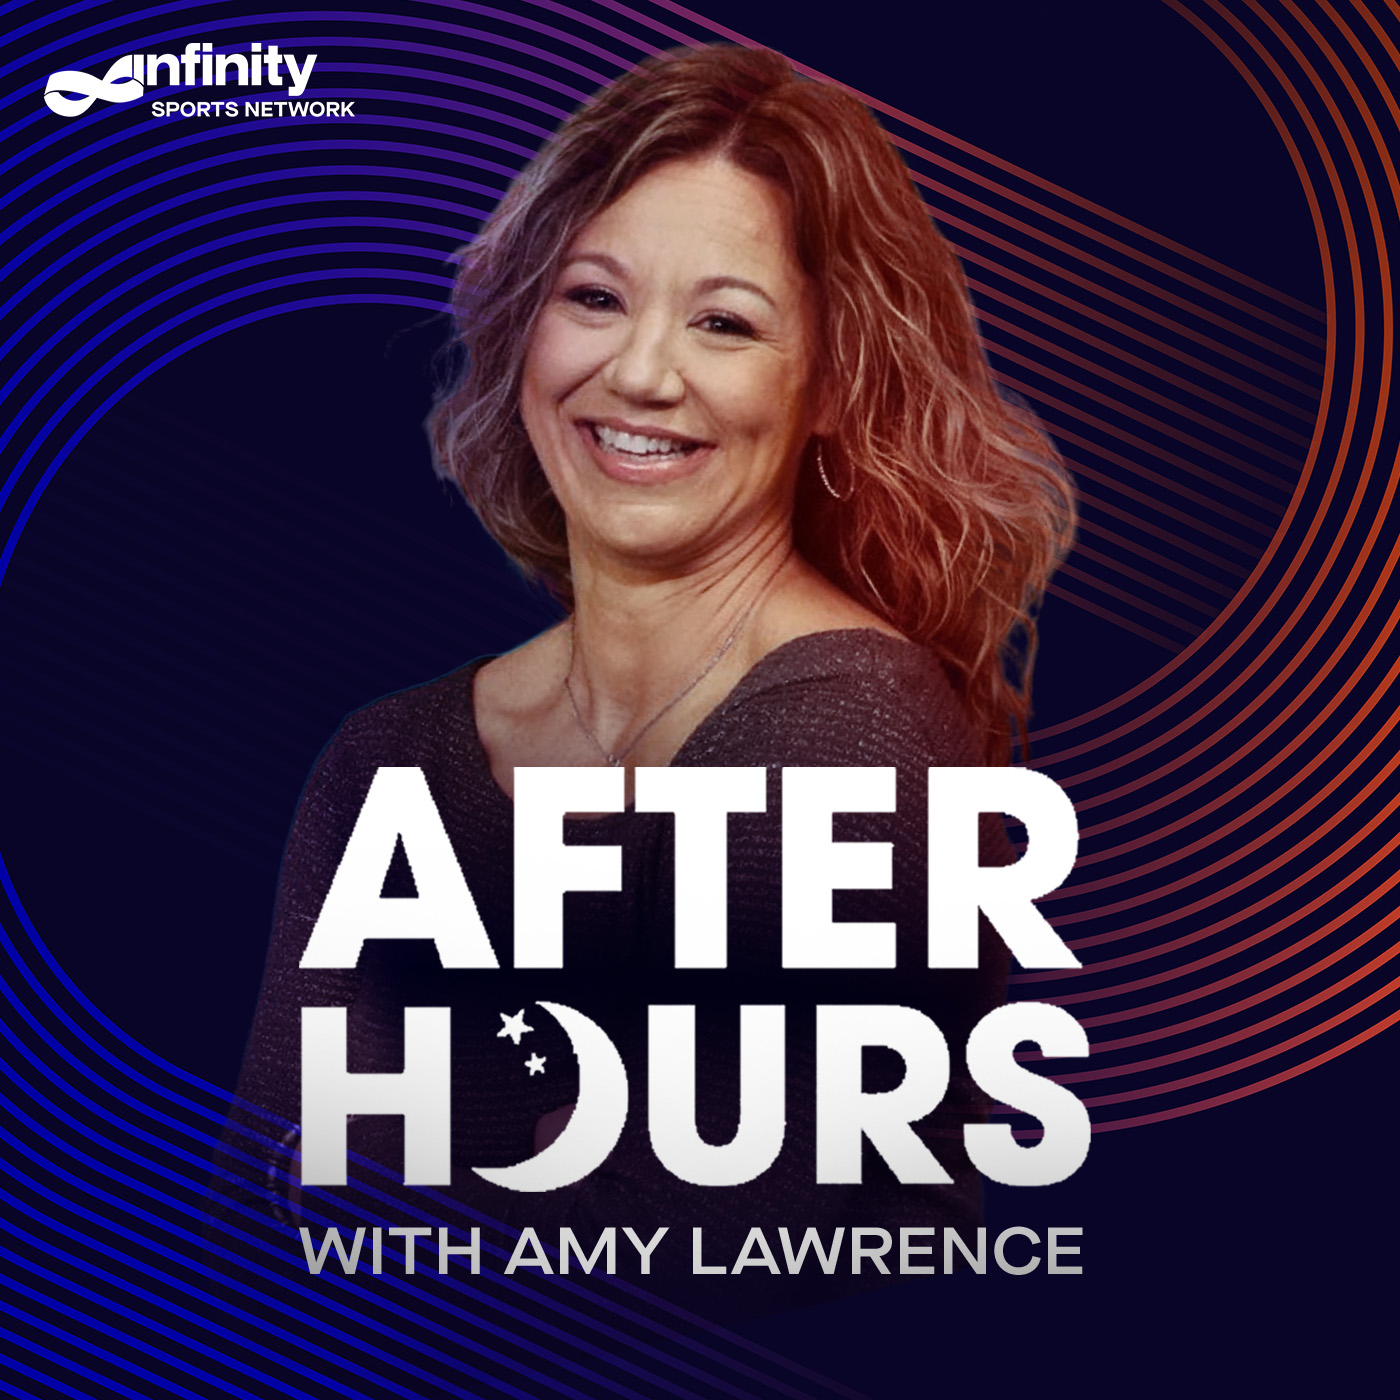 11-19-21 After Hours with Amy Lawrence PODCAST: Hour 3